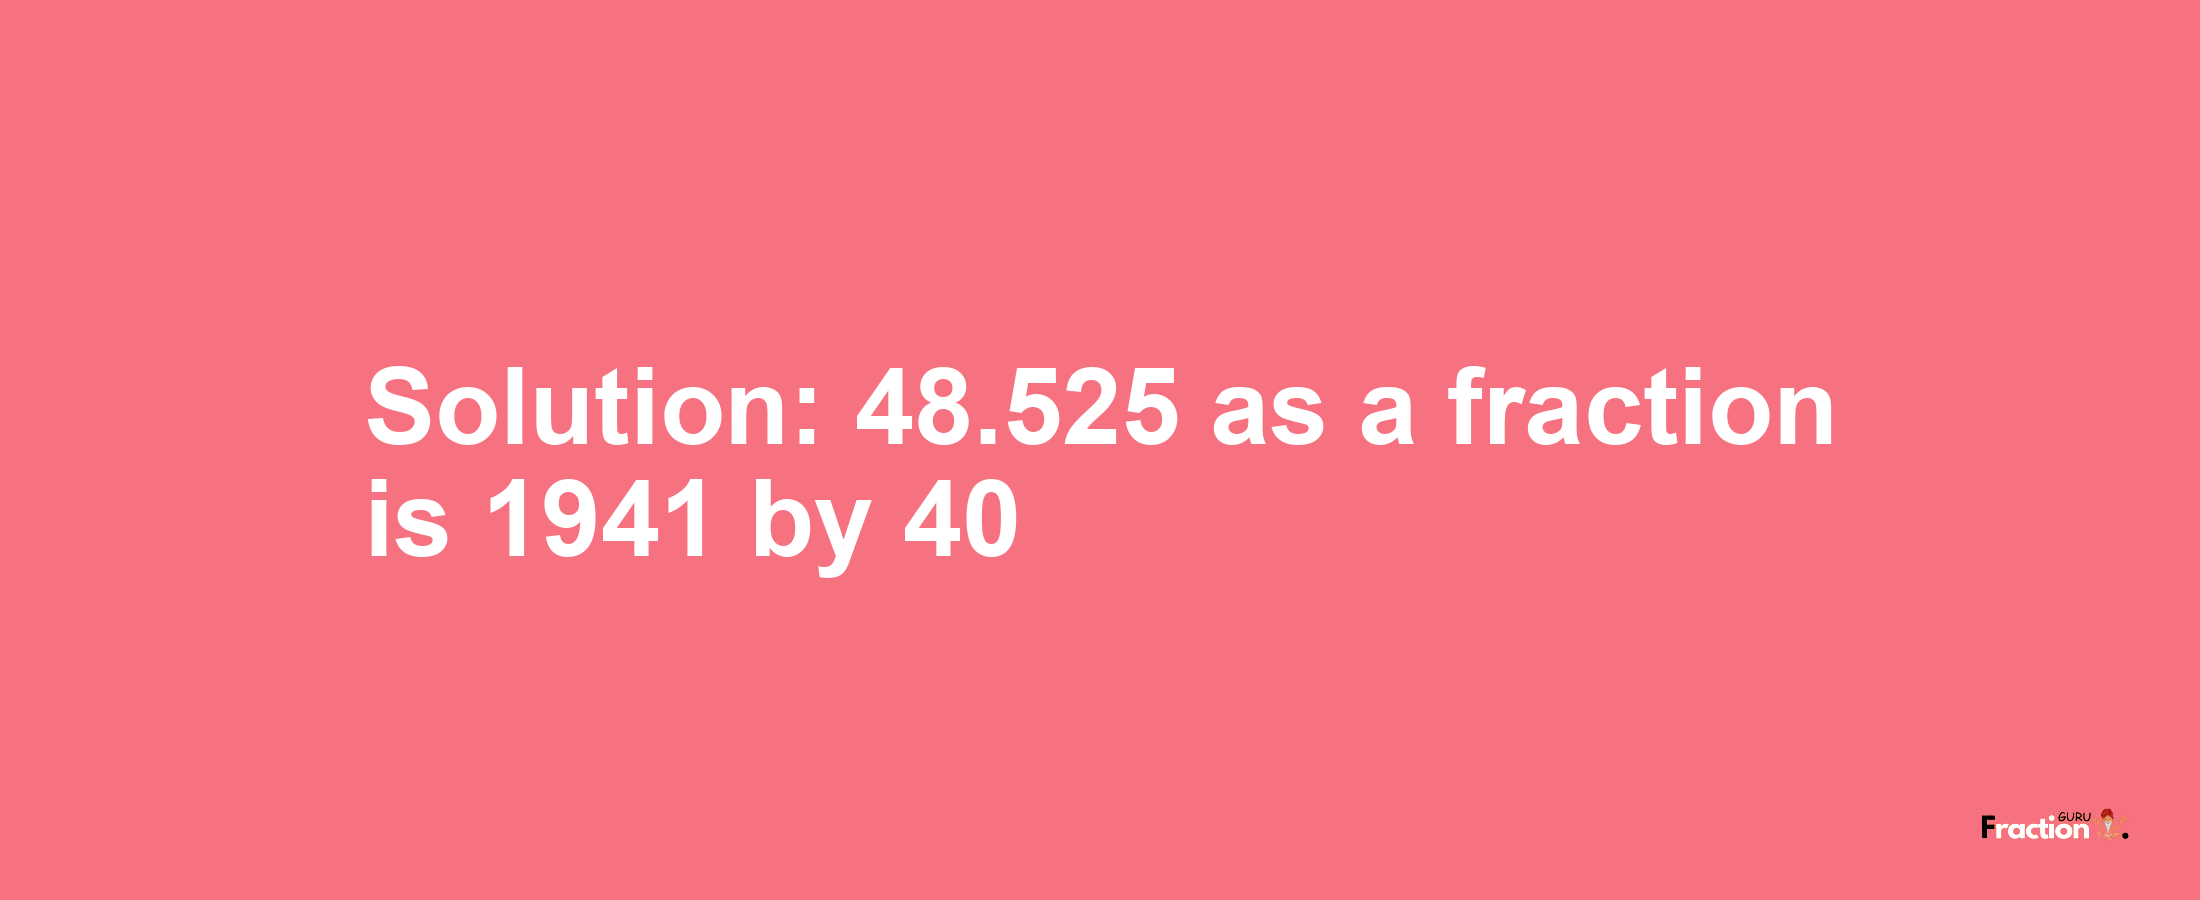 Solution:48.525 as a fraction is 1941/40